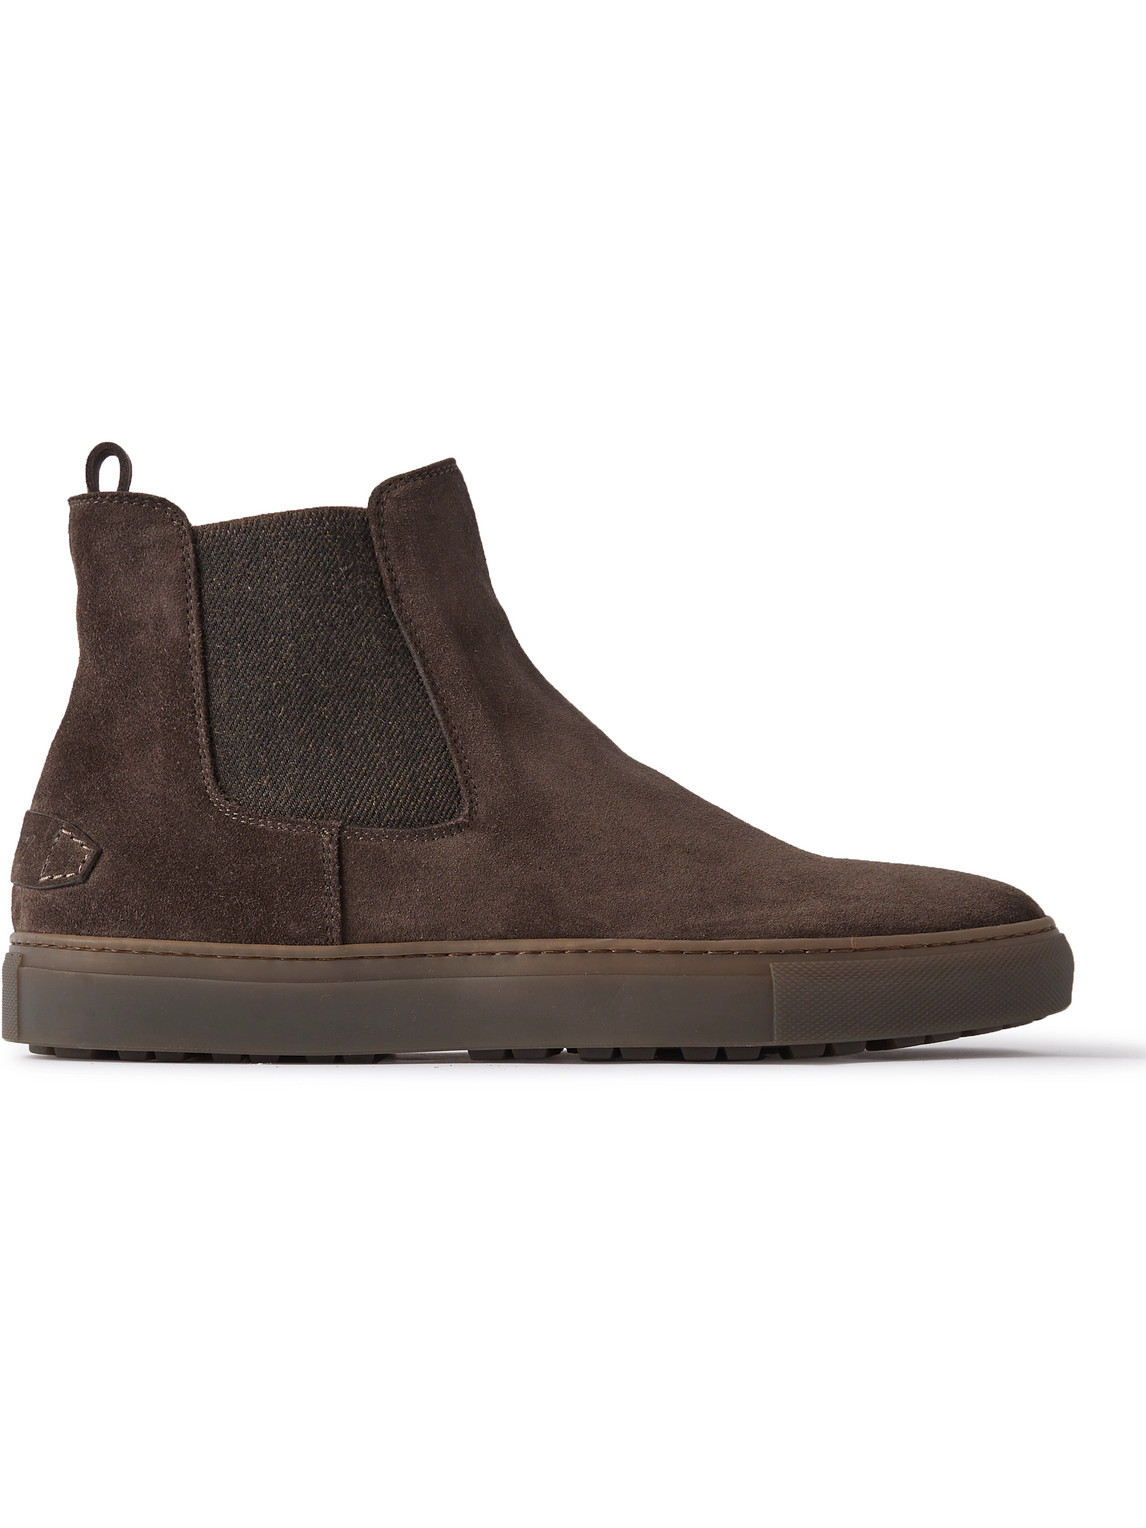 Brioni Shearling-lined Suede Chelsea Boots In Brown